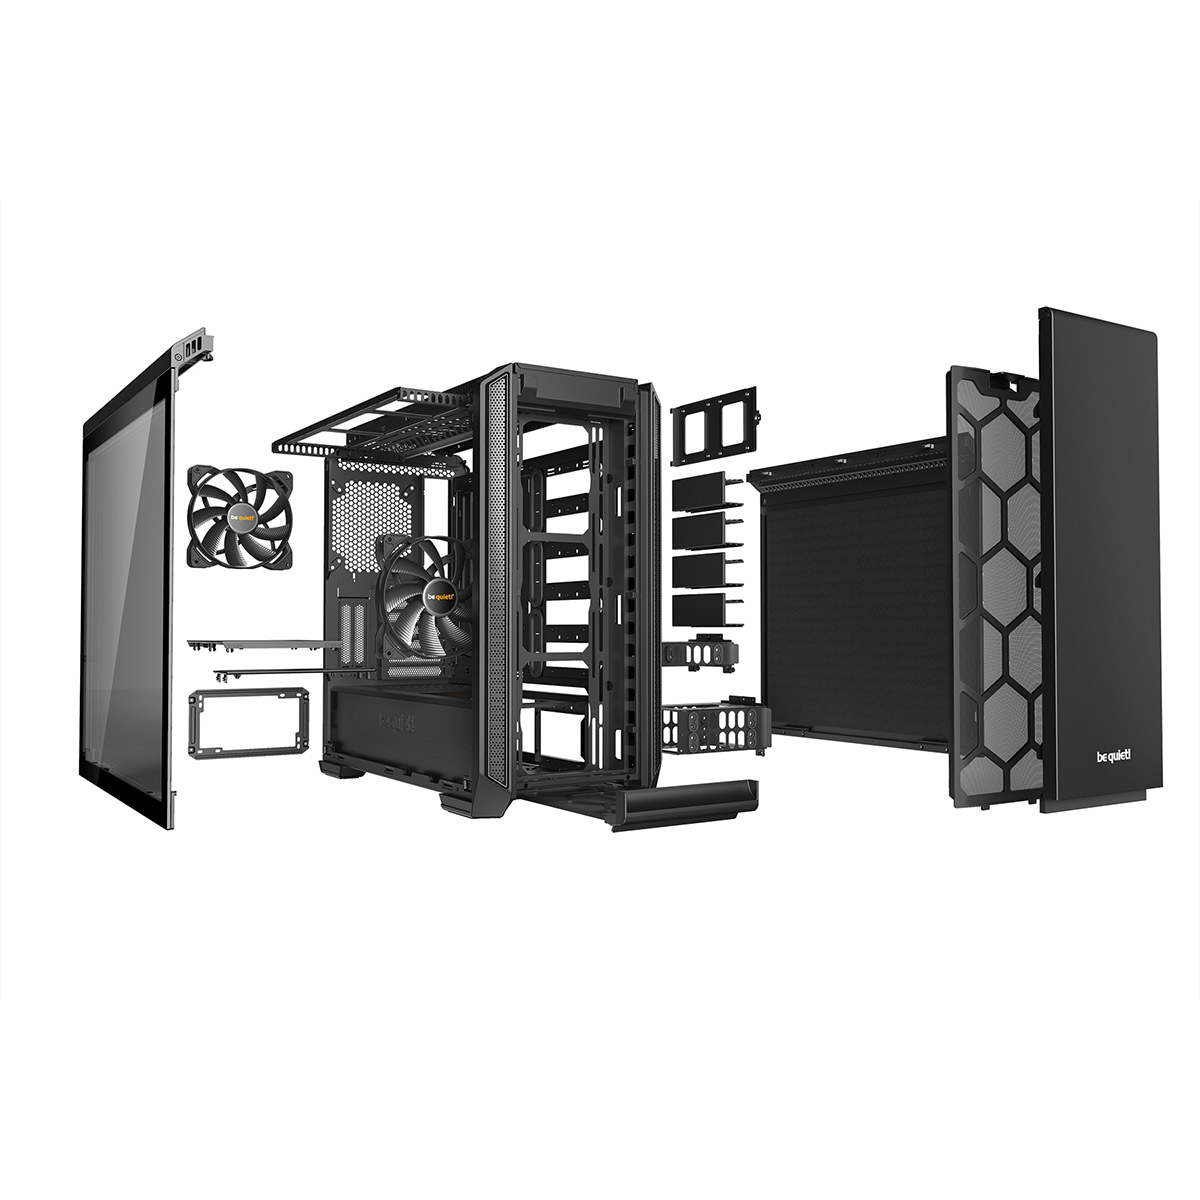 be quiet! - be quiet! Silent Base 601 Midi-Tower Case - Black Tempered Glass